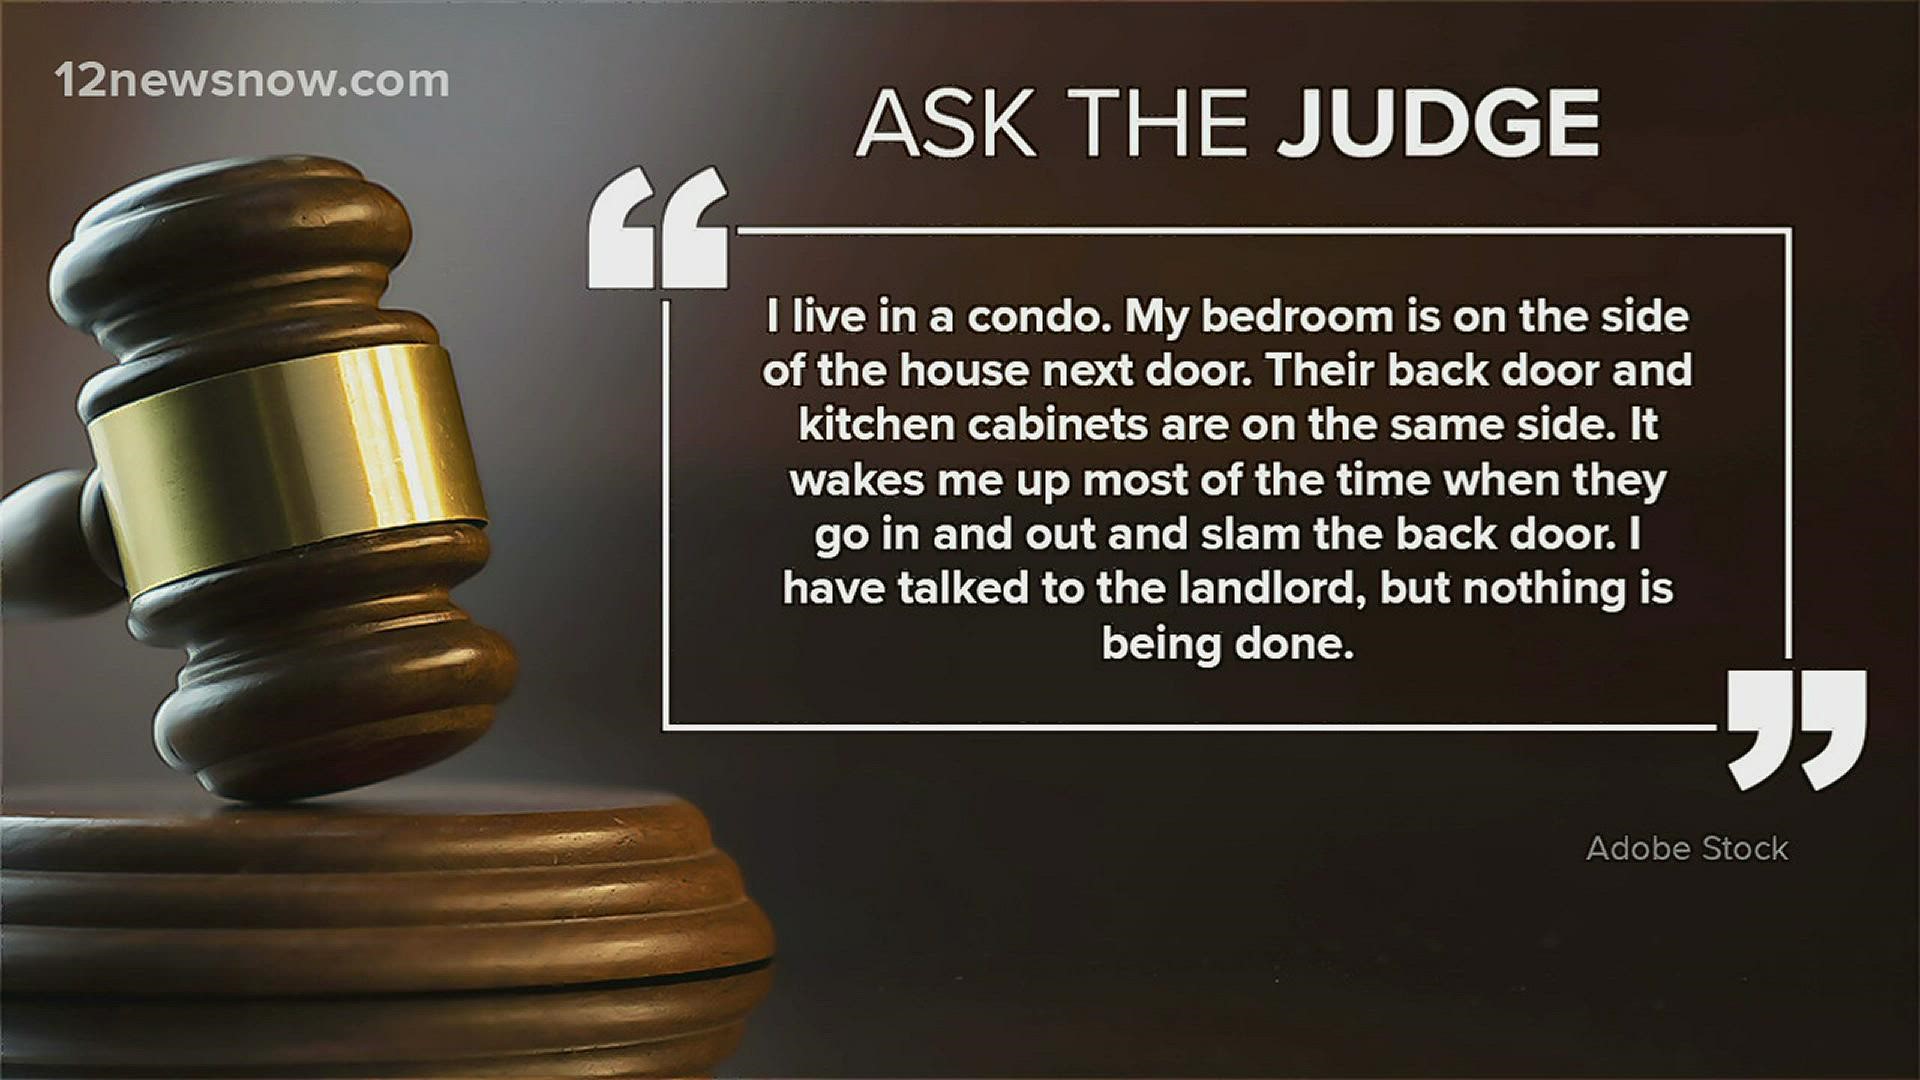 If you have any legal questions you want answers to, submit them to 12NewsNow.com/askthejudge.